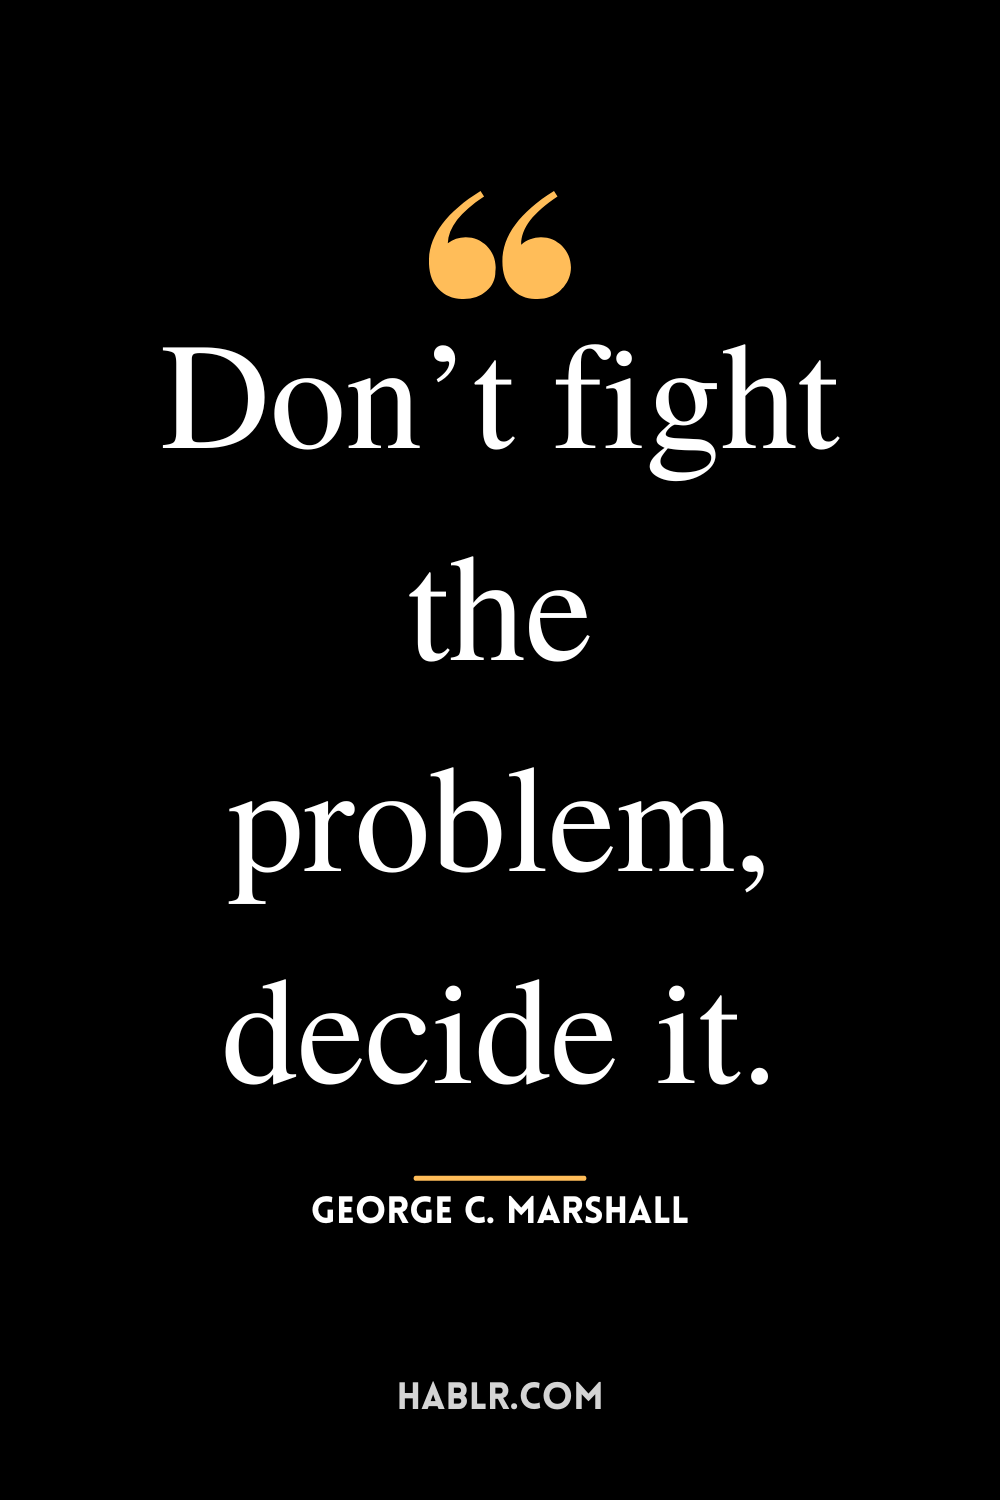 “Don’t fight the problem, decide it.”-George C. Marshall